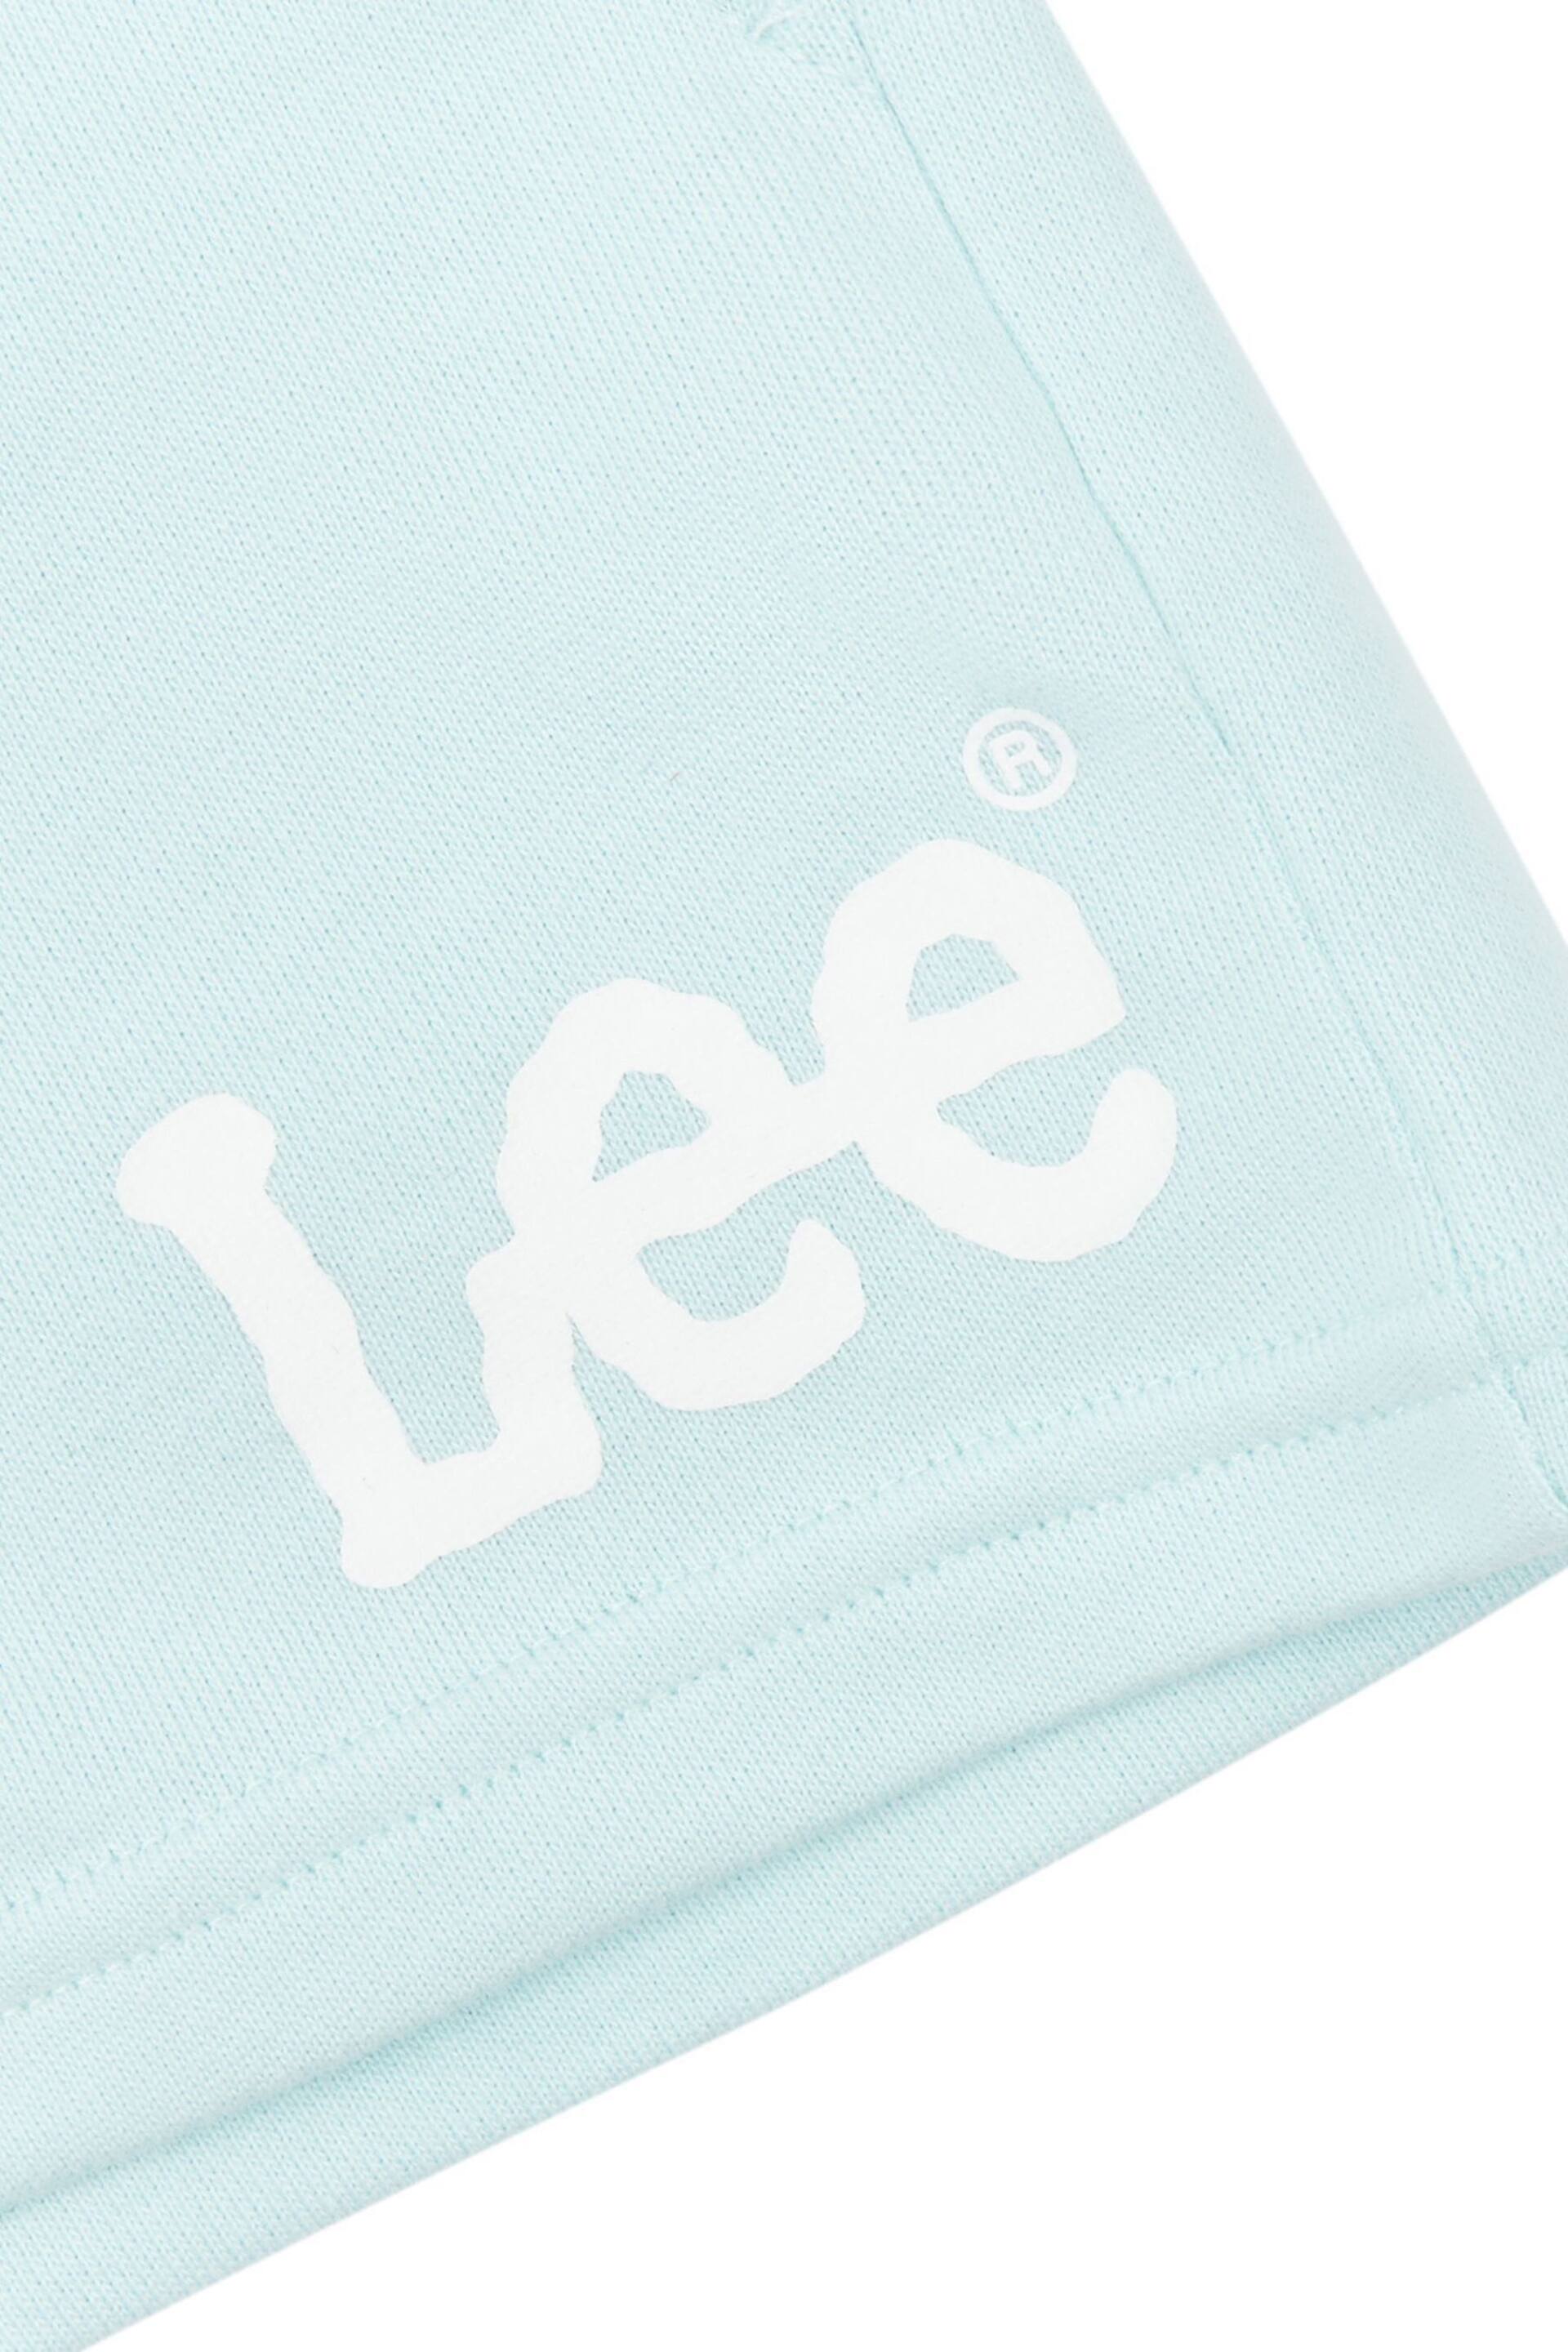 Lee Graphic Logo Puffer Gilet - Image 3 of 3